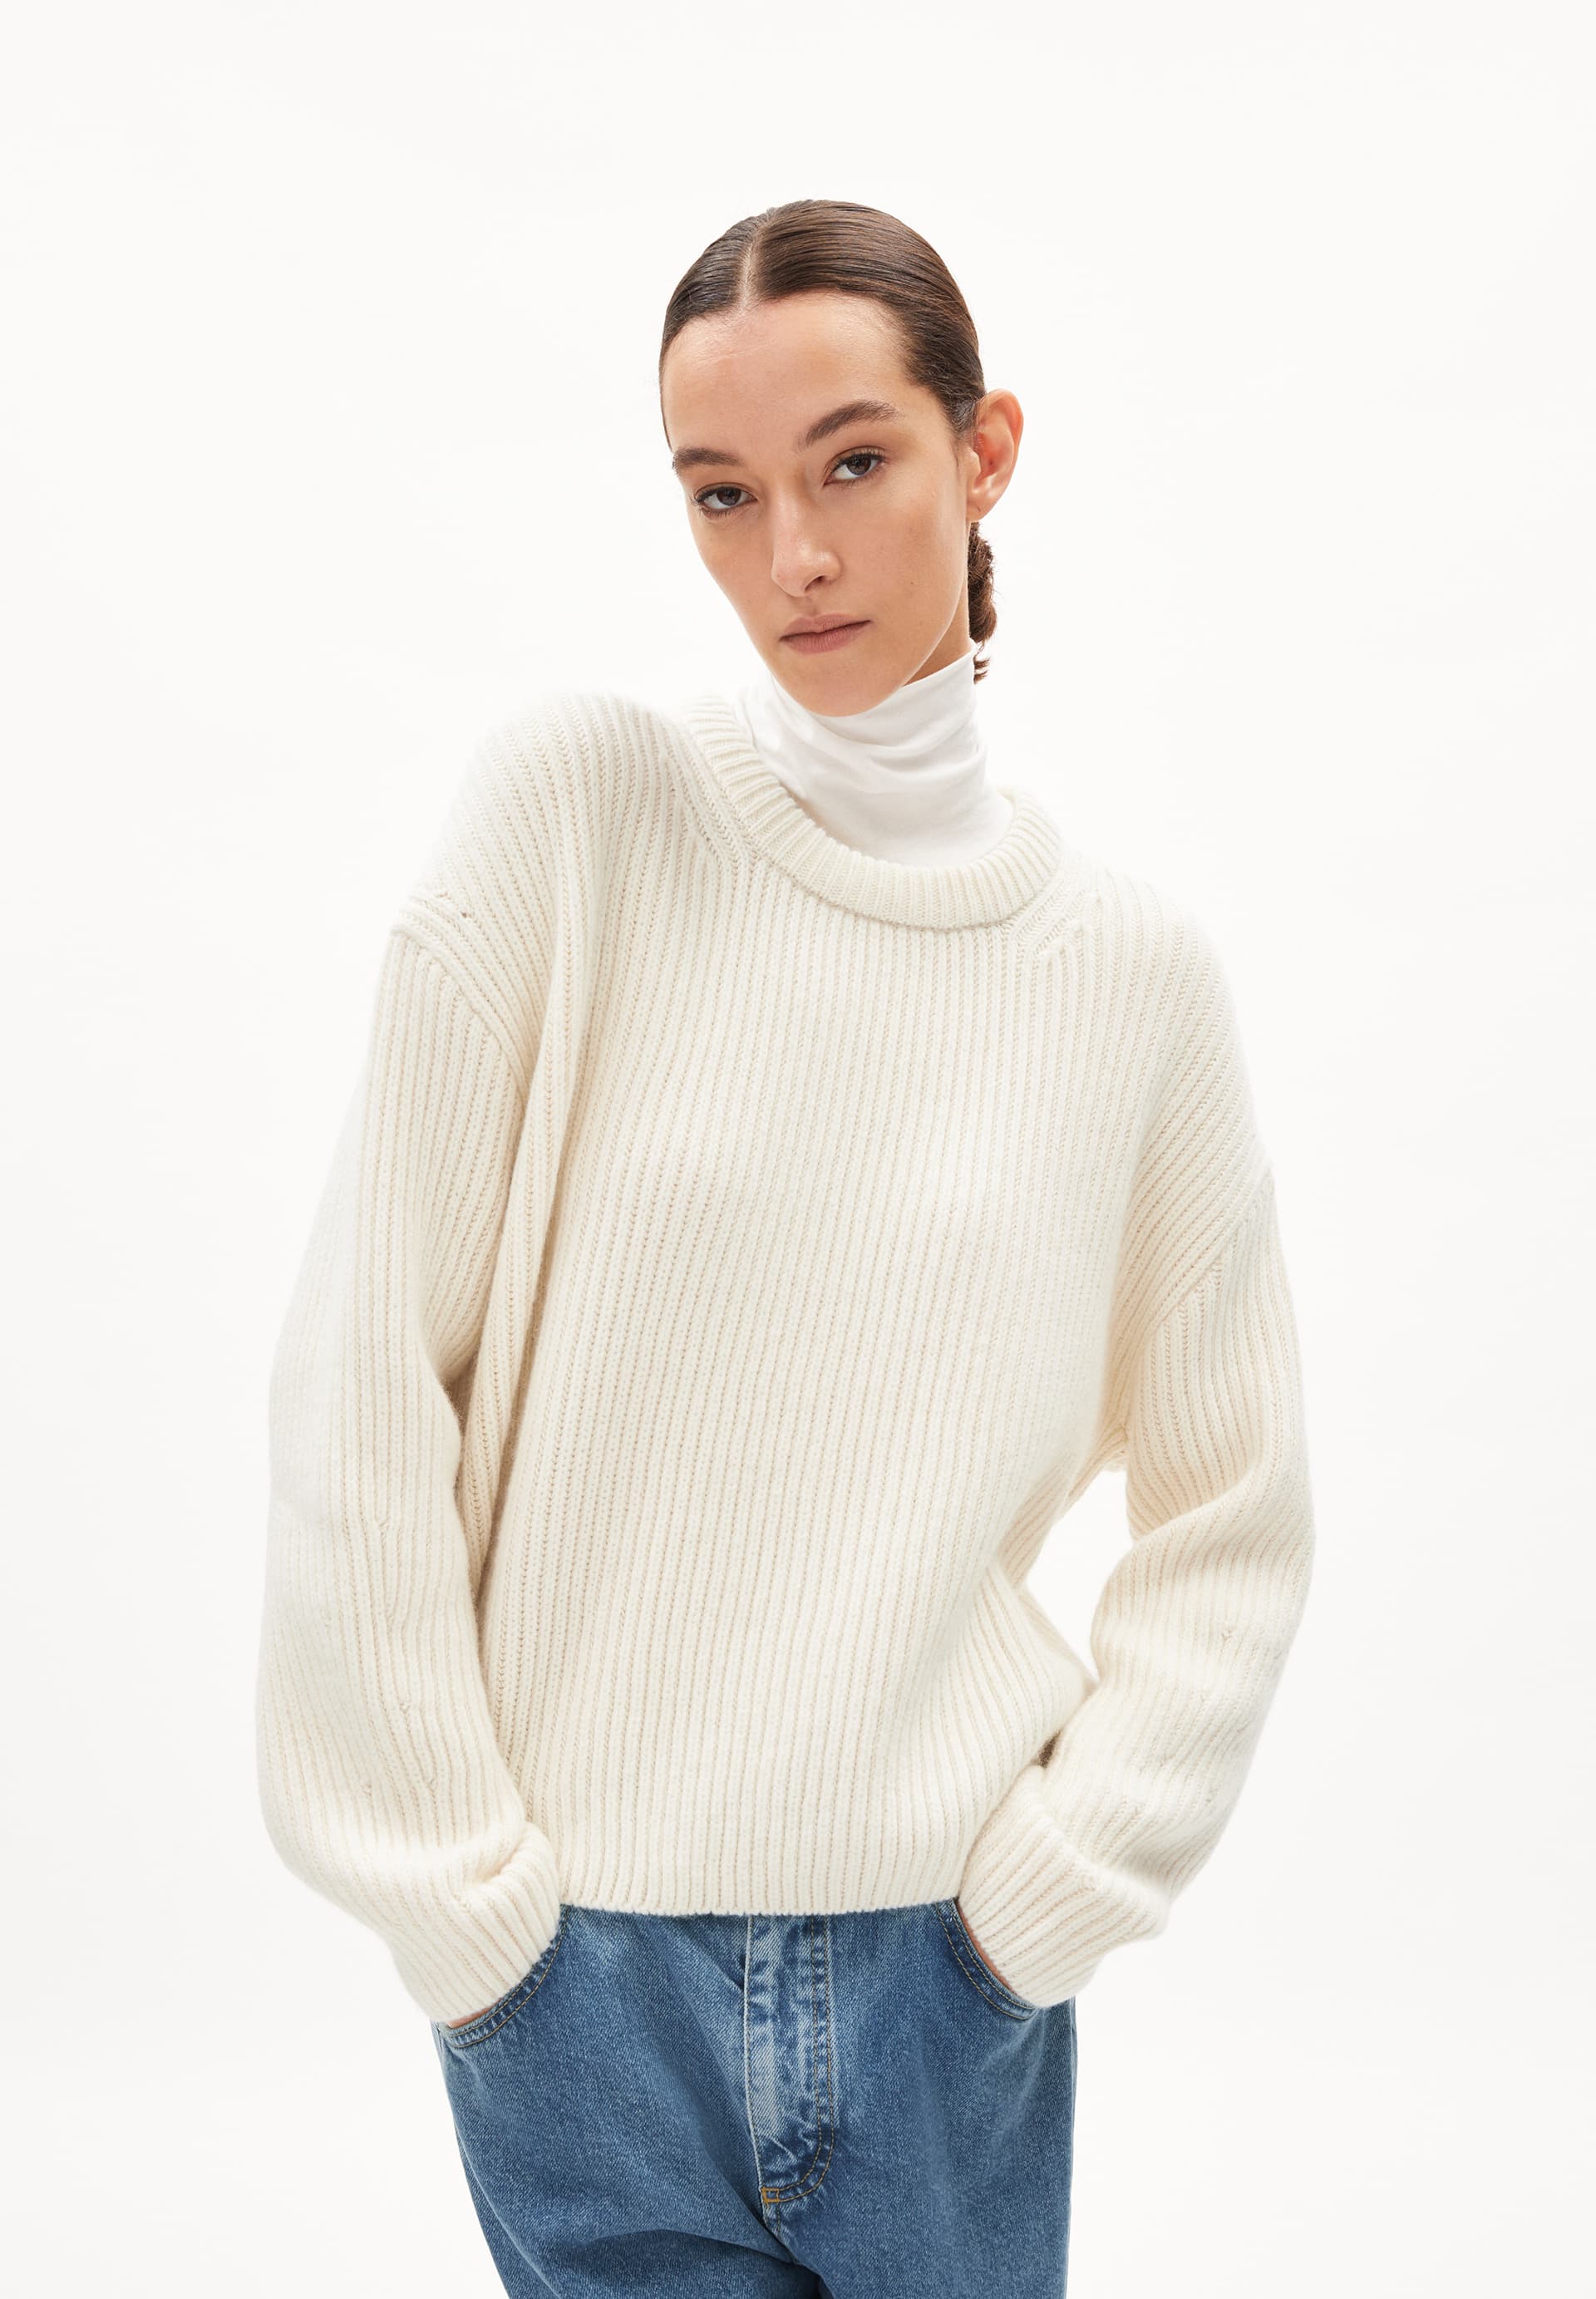 NAARUKO Knit Sweater Oversized Fit made of Organic Cotton Mix